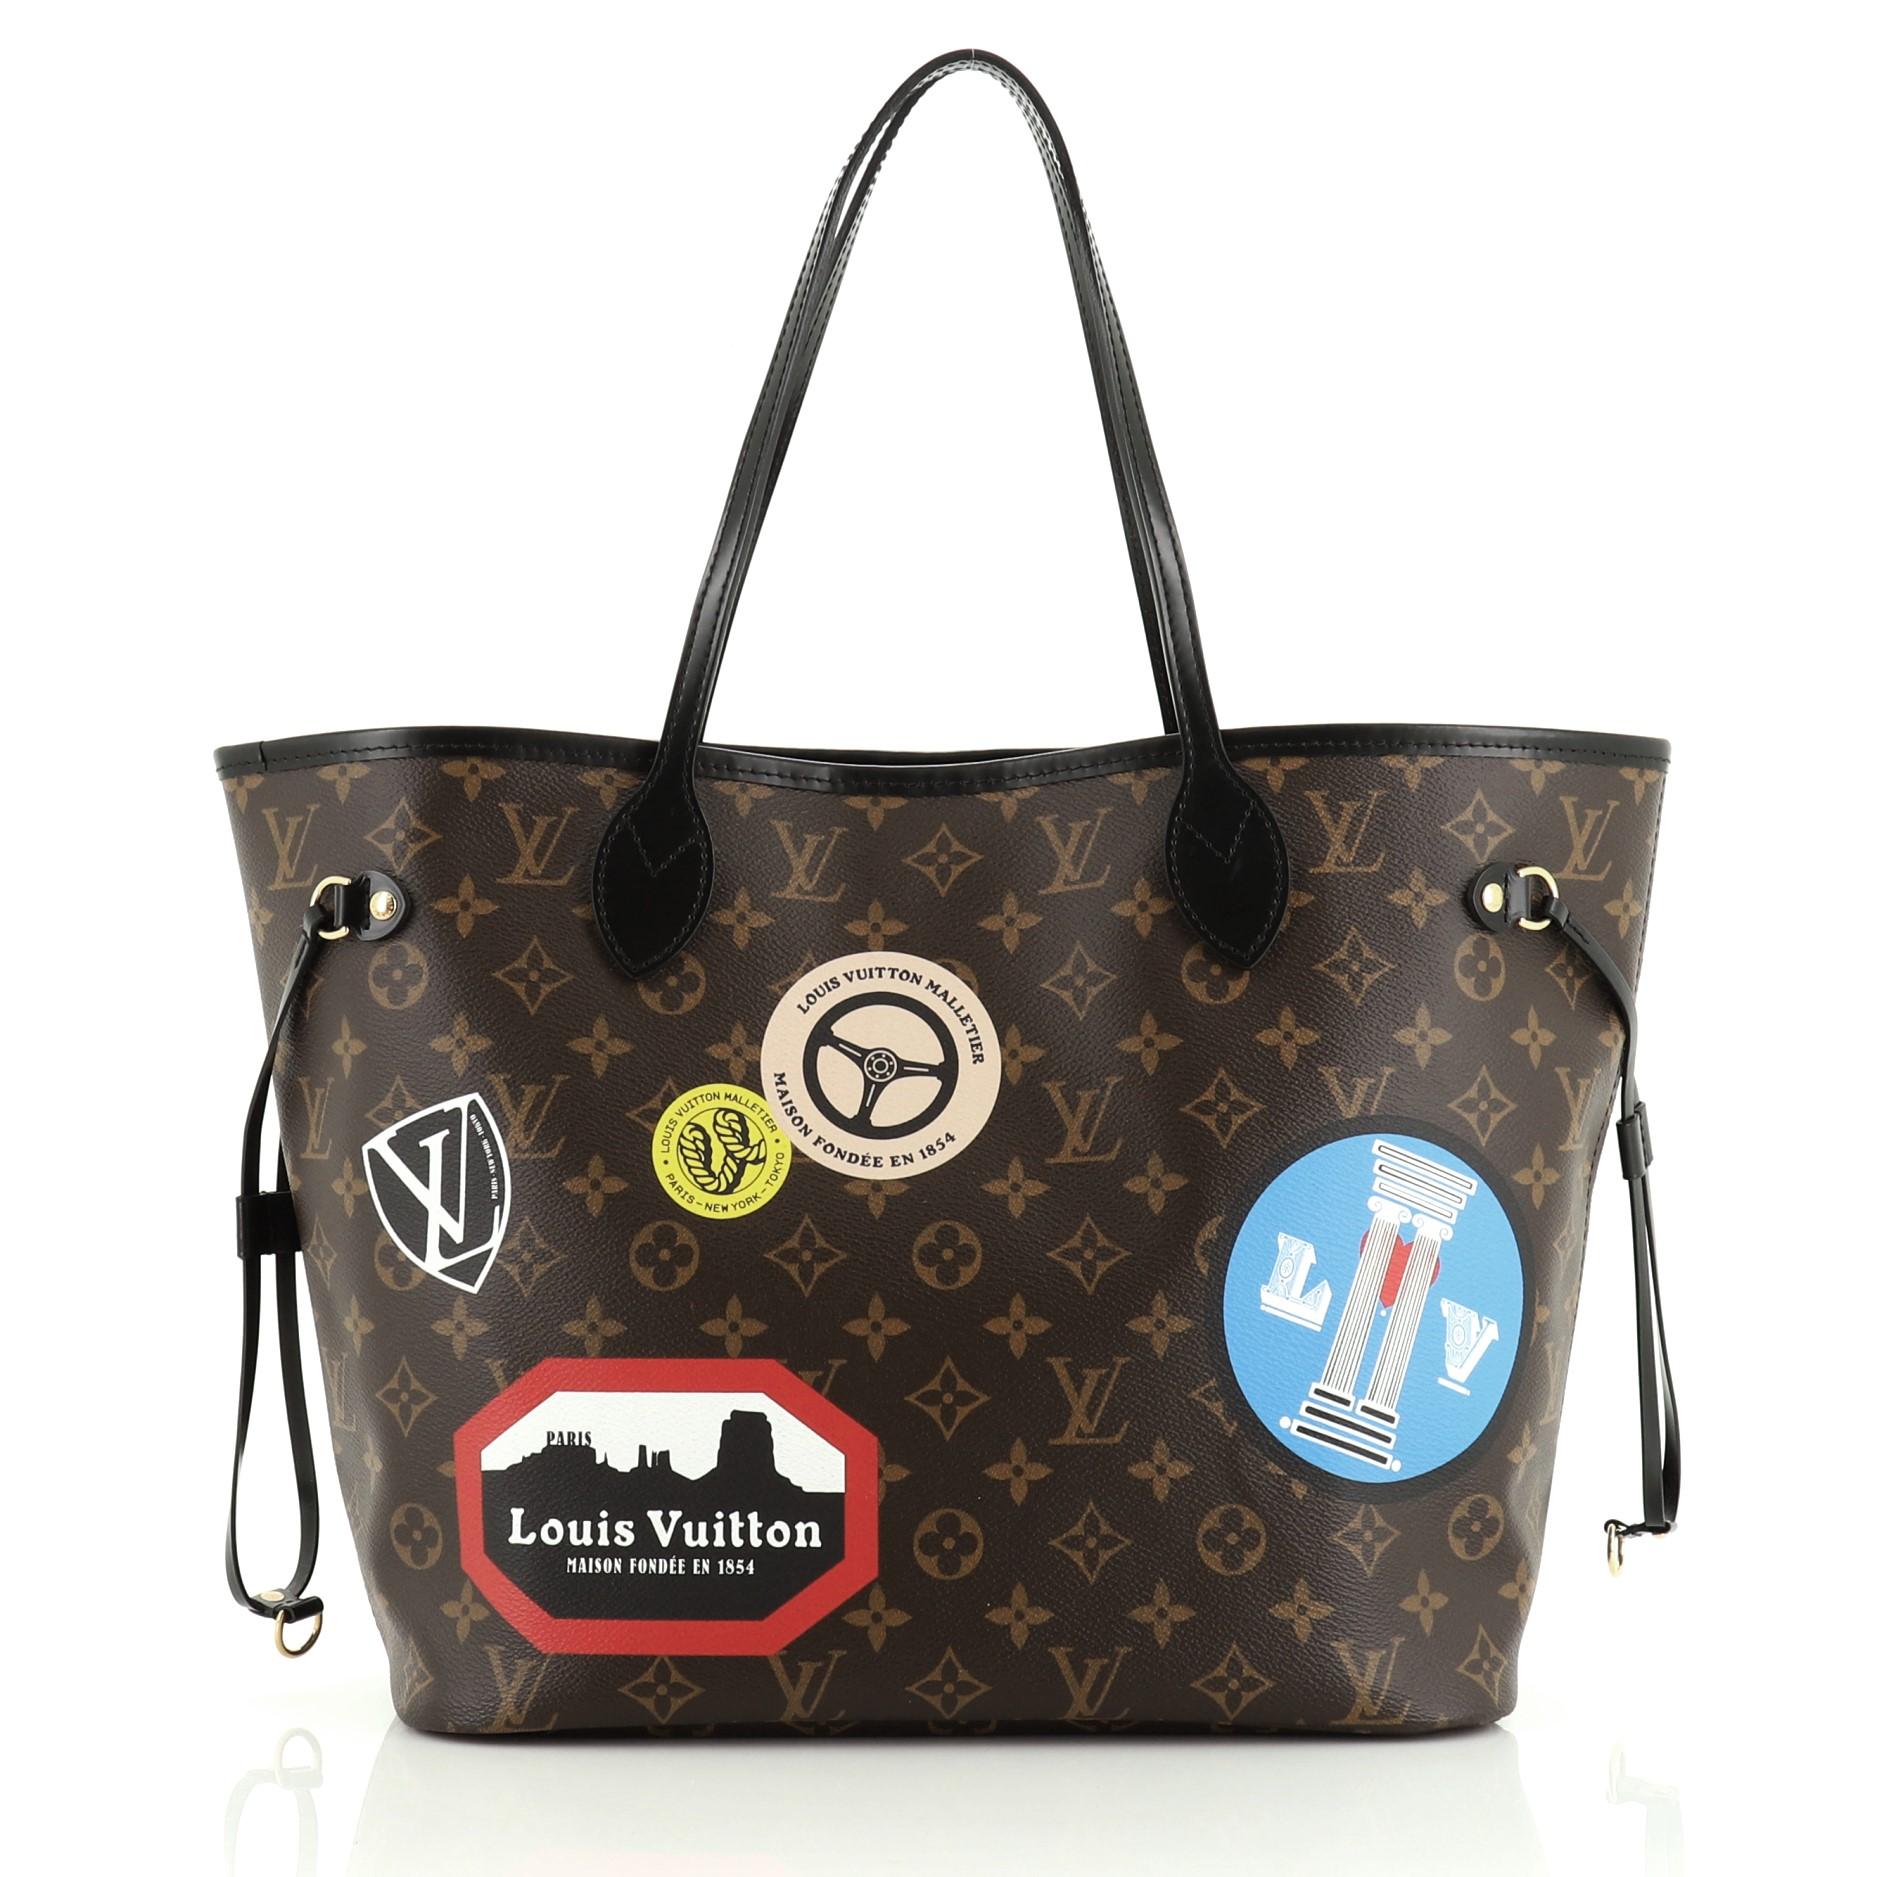 This Louis Vuitton Neverfull NM Tote Limited Edition World Tour Monogram Canvas MM, crafted in brown monogram coated canvas, features dual slim handles, World Tour-themed stickers, side drawstrings and gold-tone hardware. Its hook closure opens to a